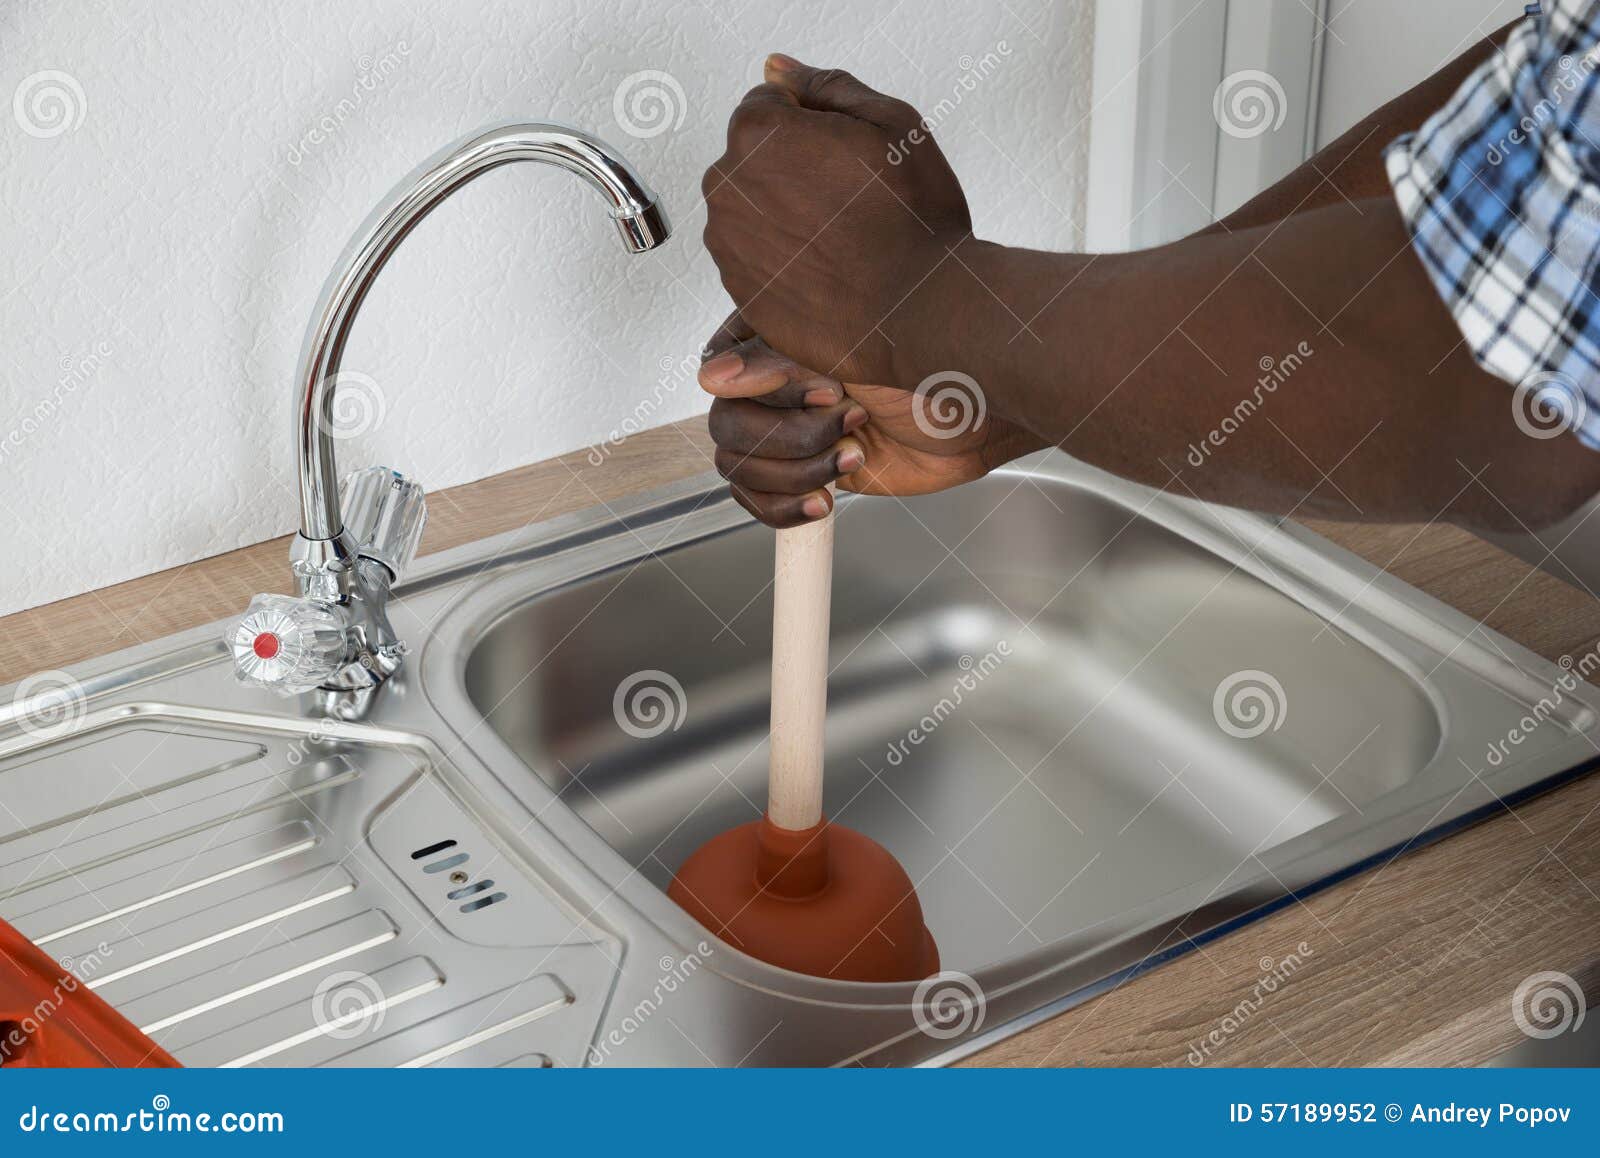 Woman Cleaning Bathroom Sink Drain Using Plunger. Stock Photo, Picture and  Royalty Free Image. Image 176038405.